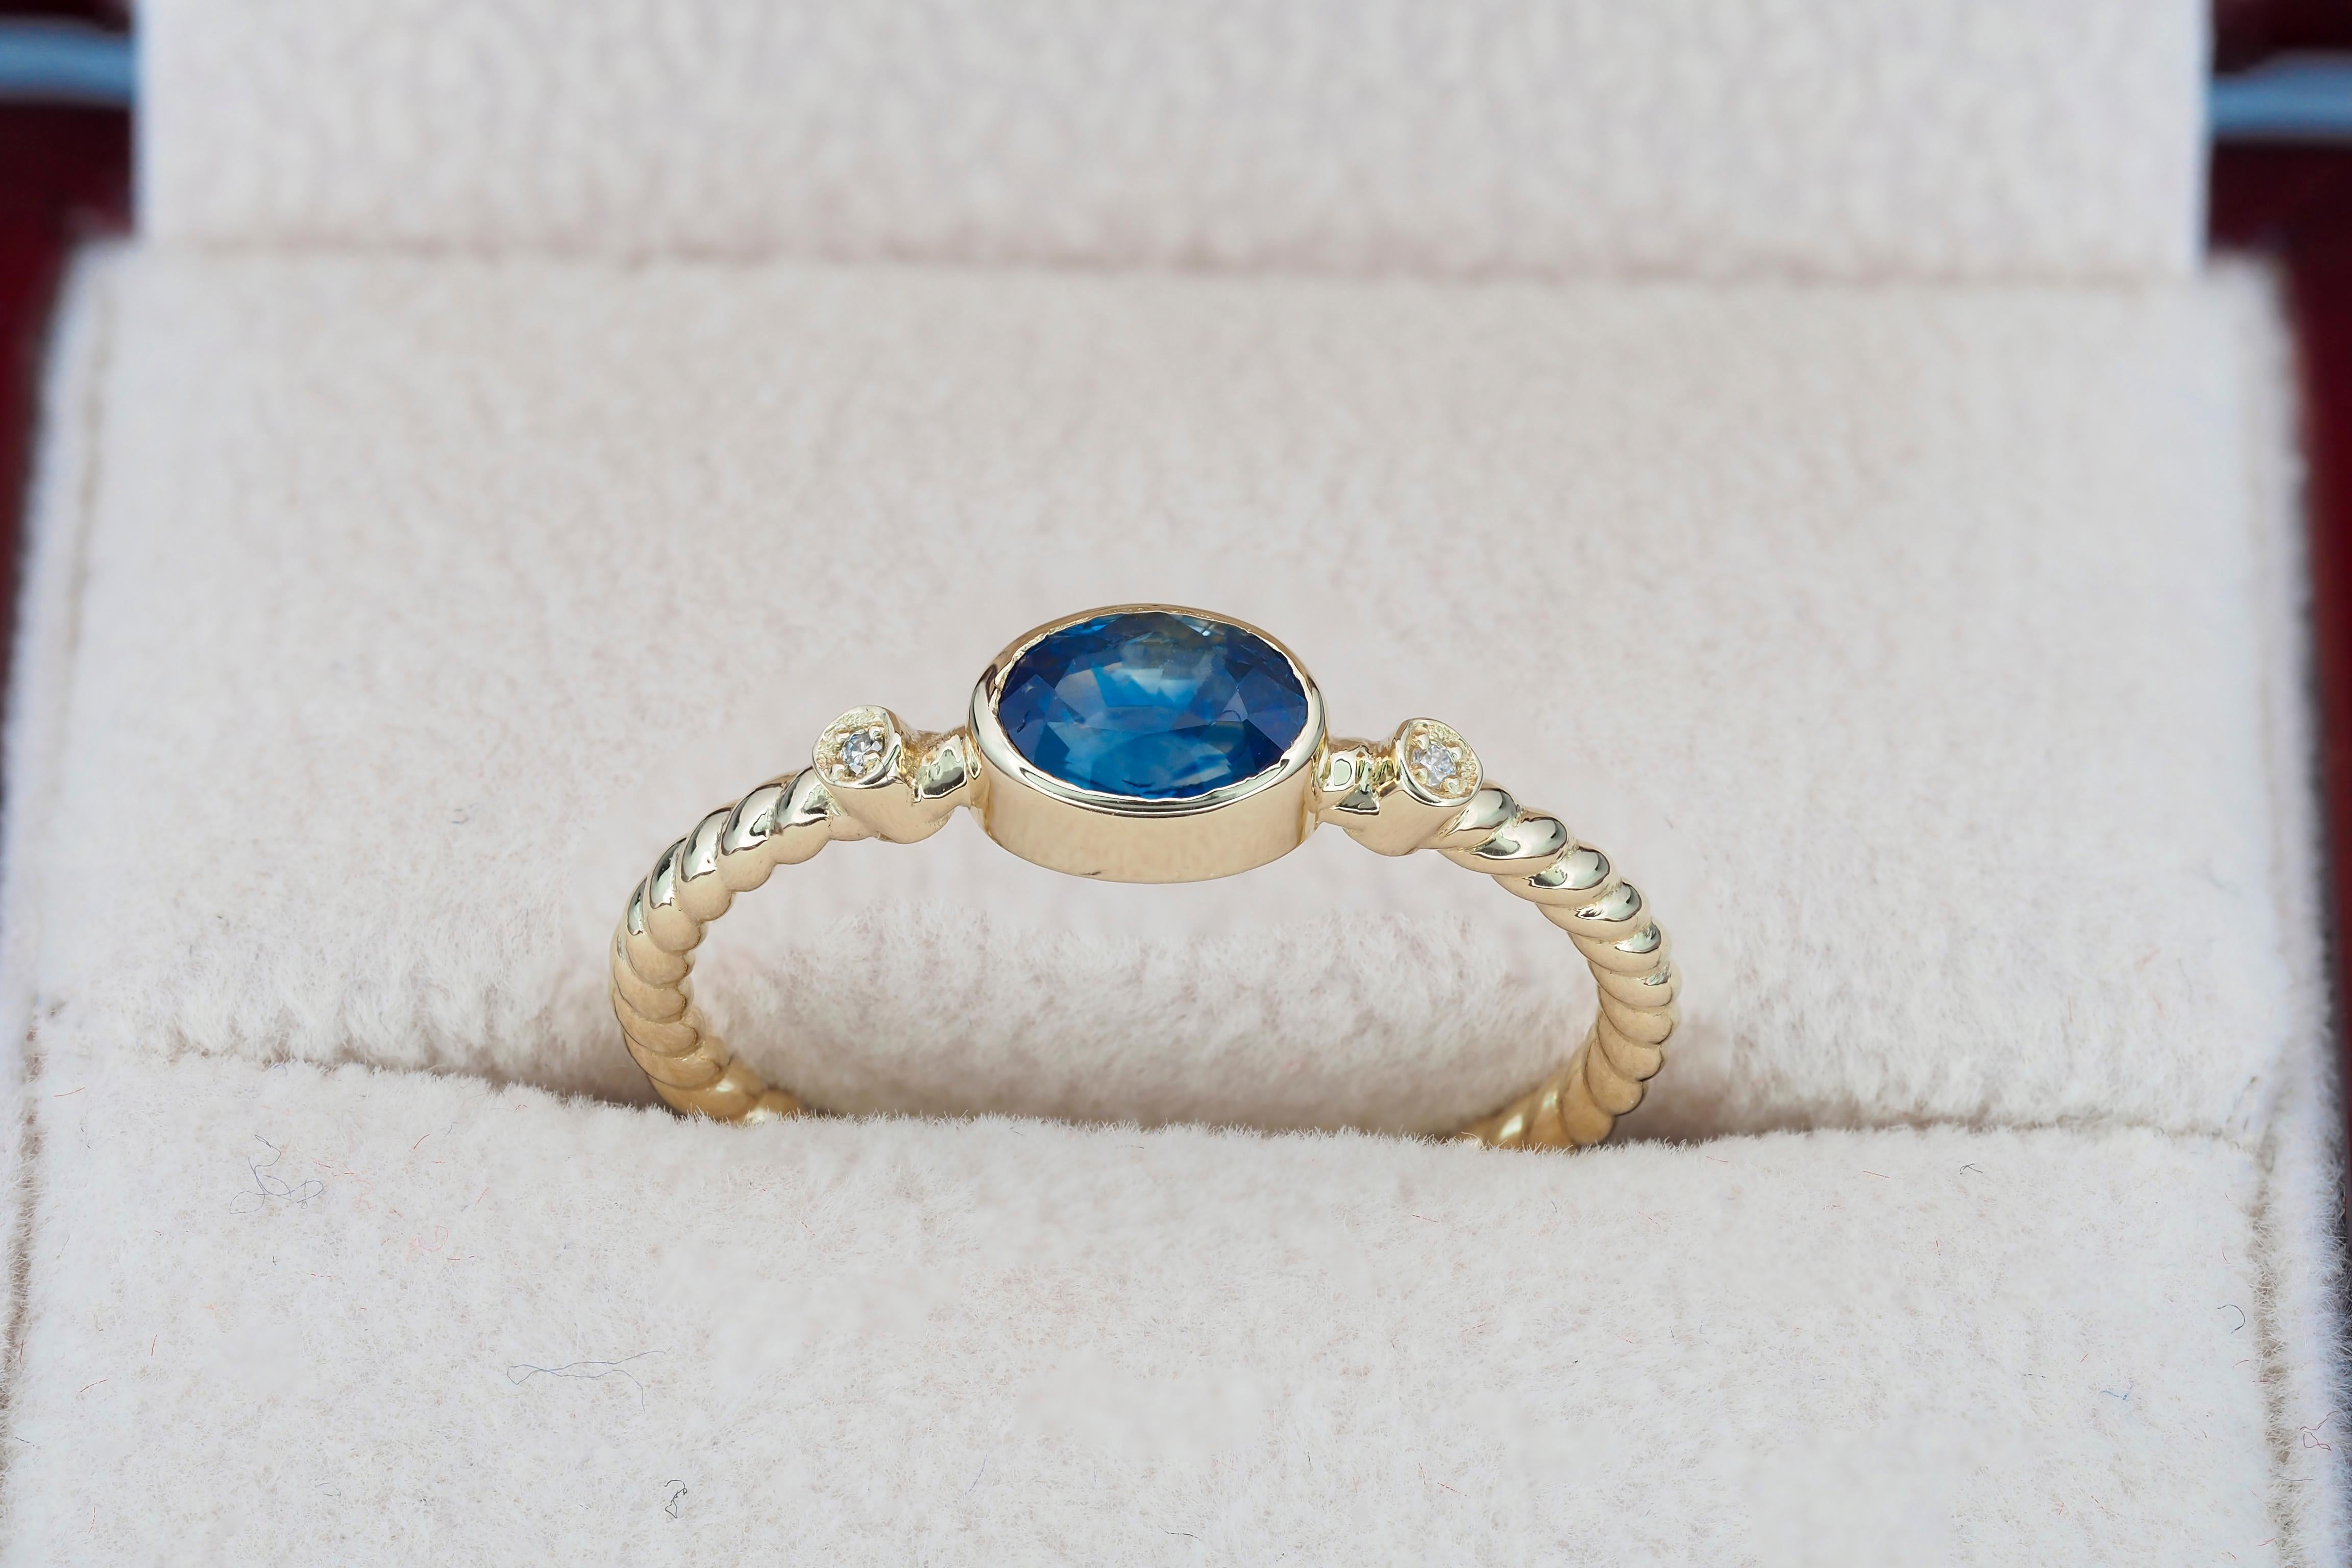 For Sale:  Blue sapphire ring in 14k gold.  4